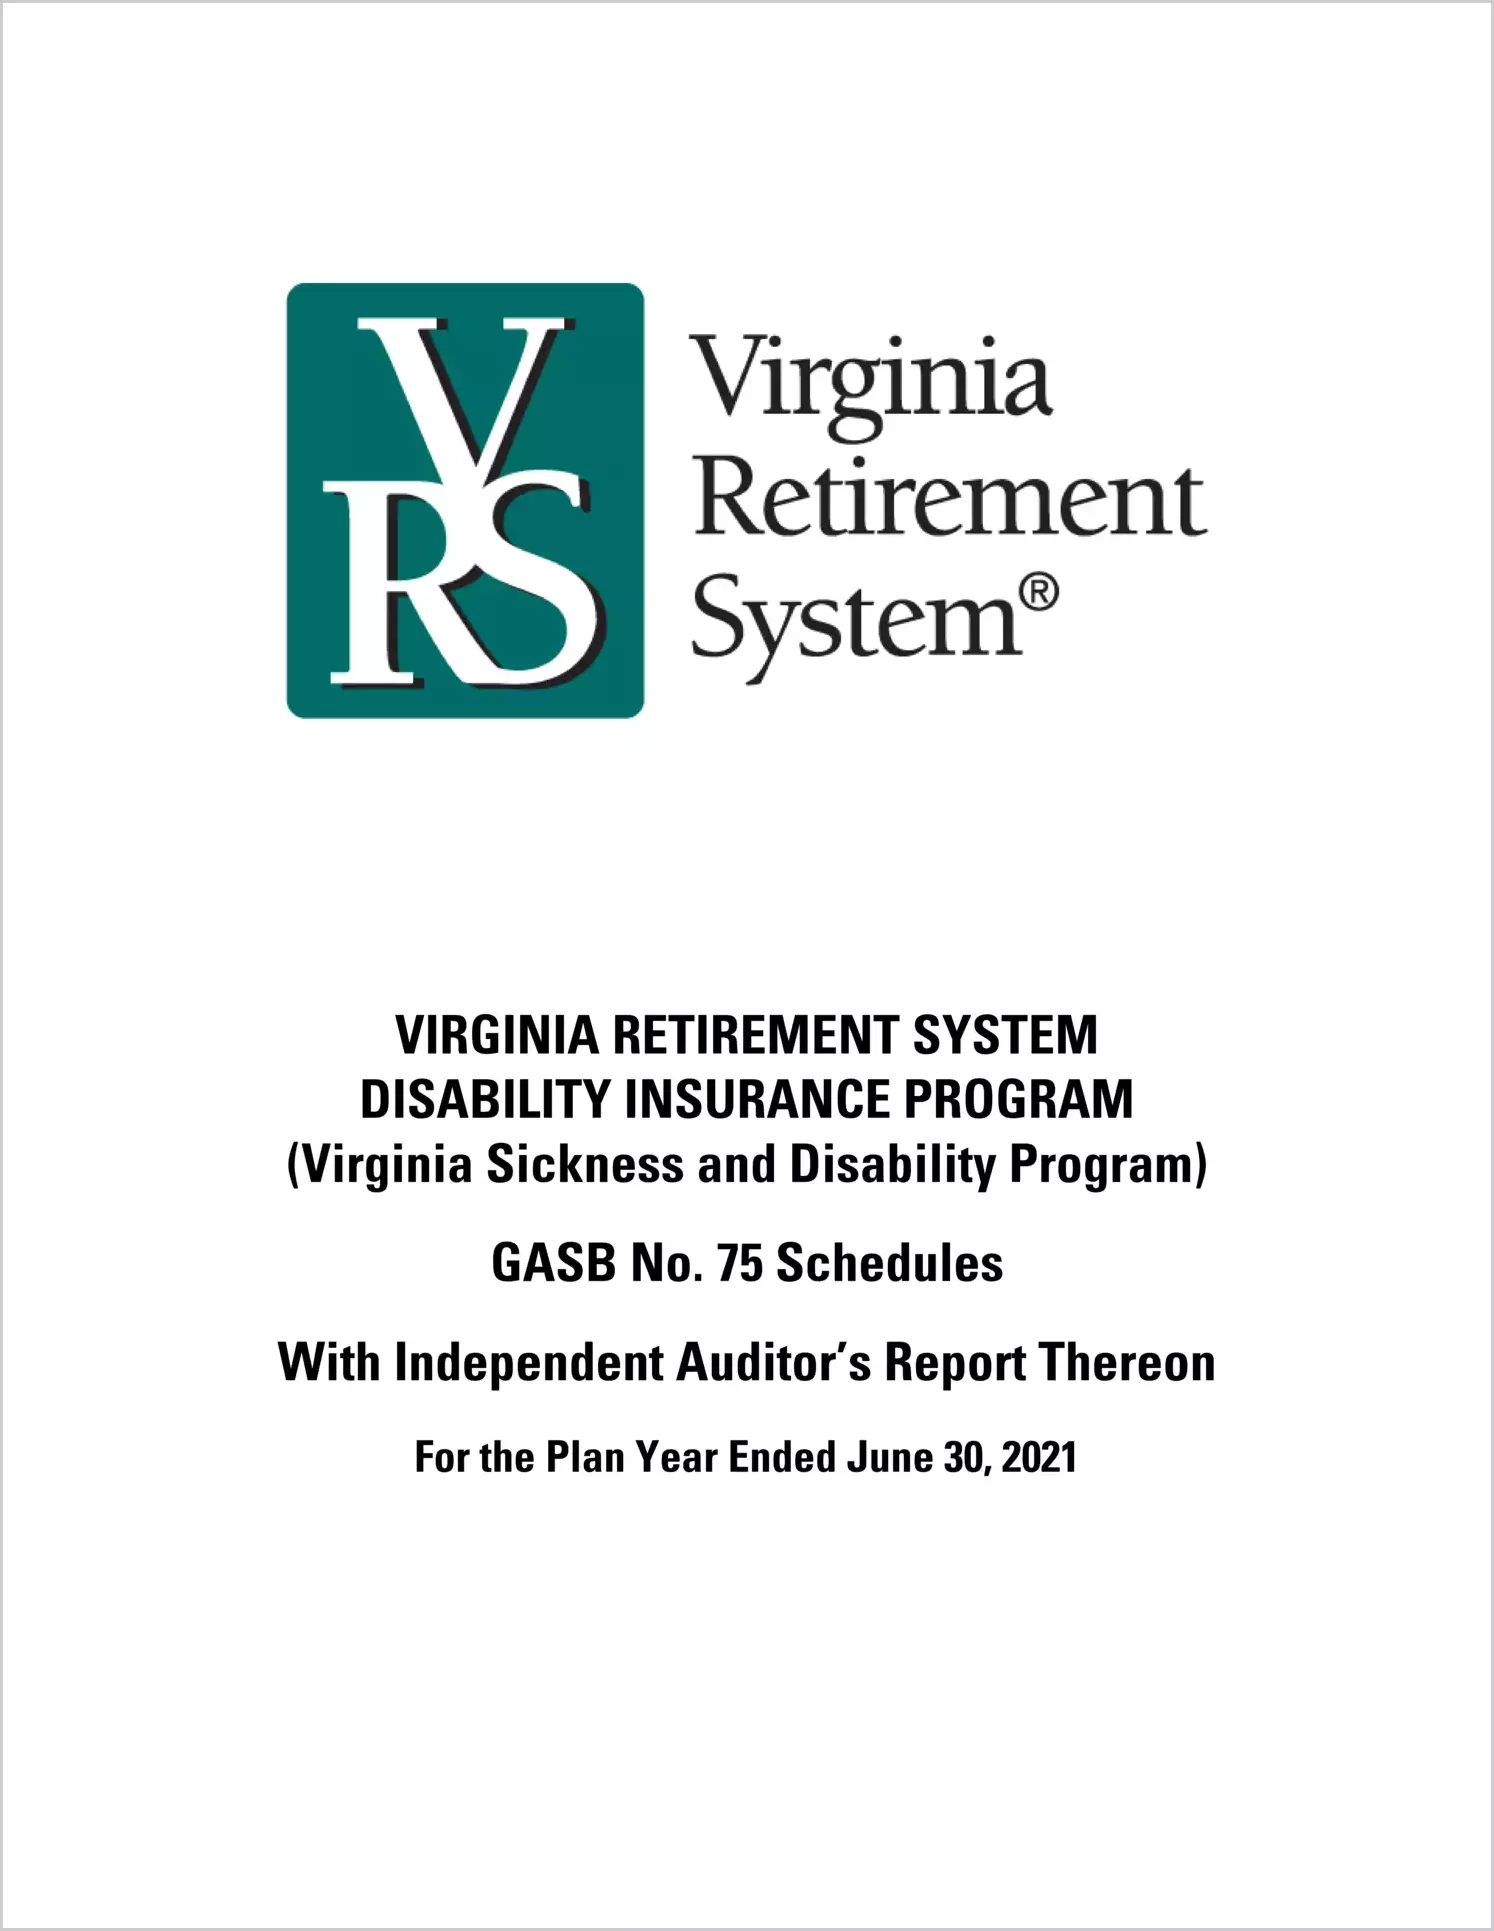 GASB 75 Schedules Virginia Retirement System Disability Insurance Program for the year ended June 30, 2021